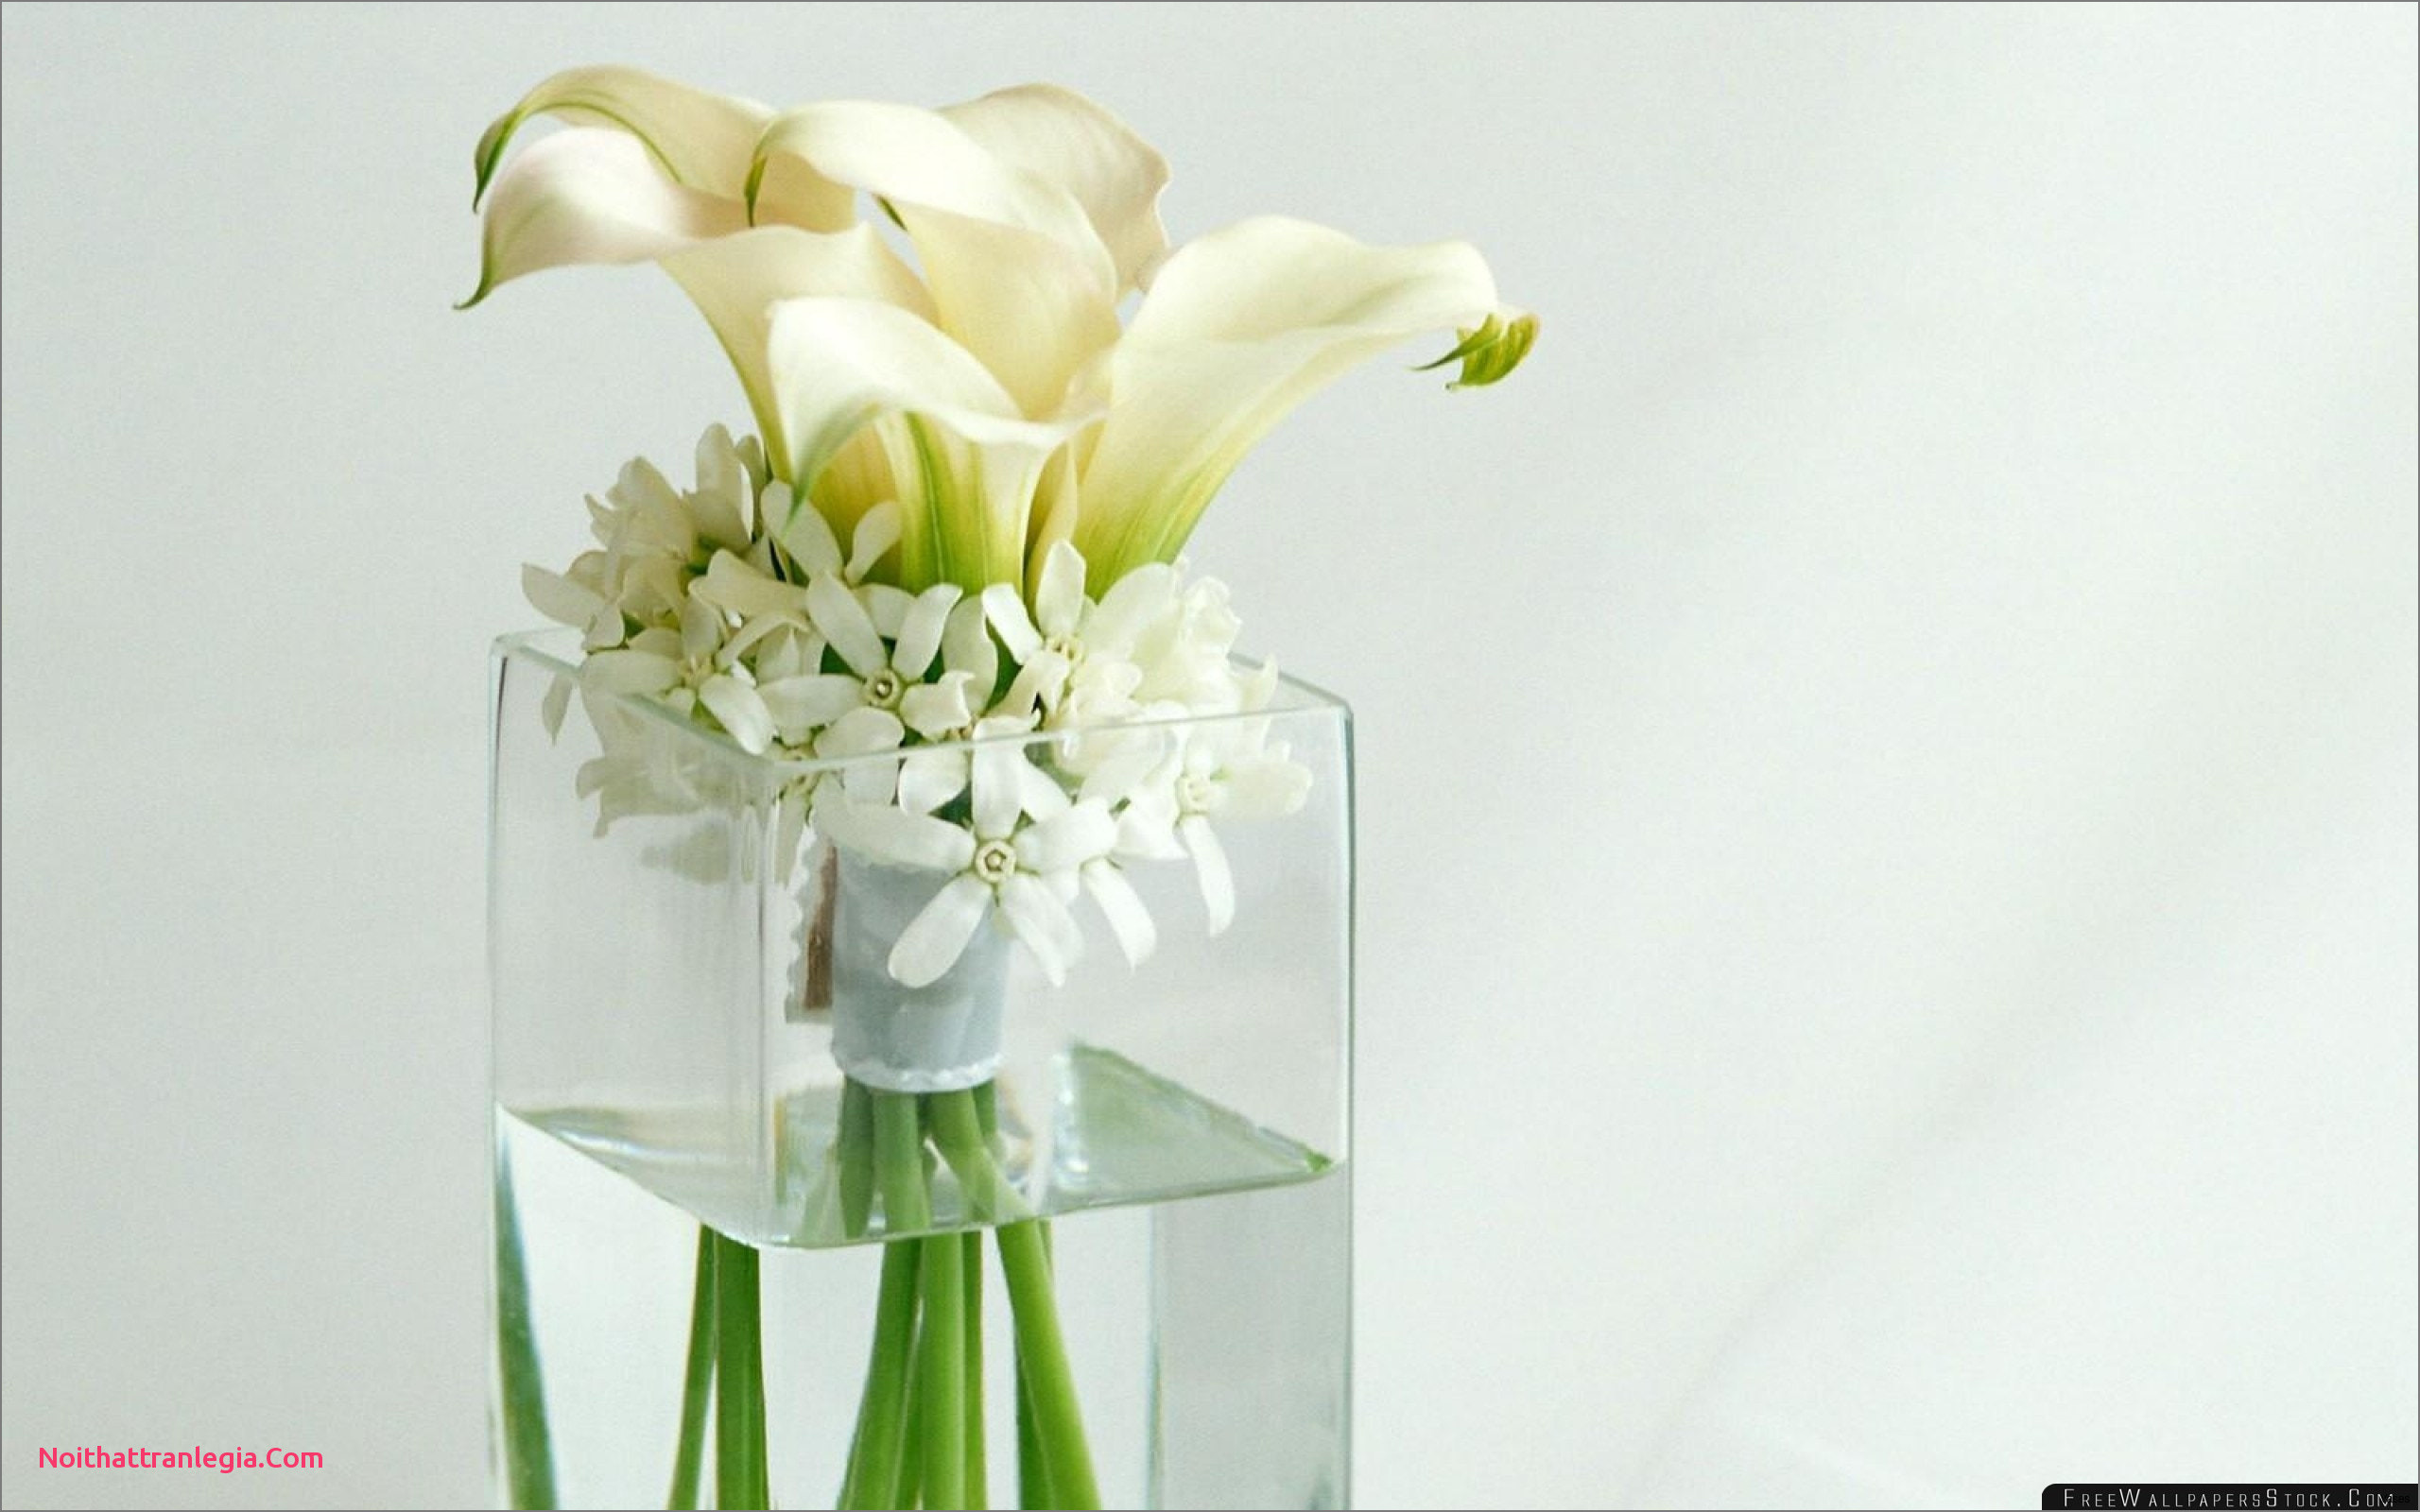 13 attractive White Floor Vase with Flowers 2022 free download white floor vase with flowers of 20 how to clean flower vases noithattranlegia vases design inside tall green vase collection tall vase centerpiece ideas vases flowers in water 0d artificial